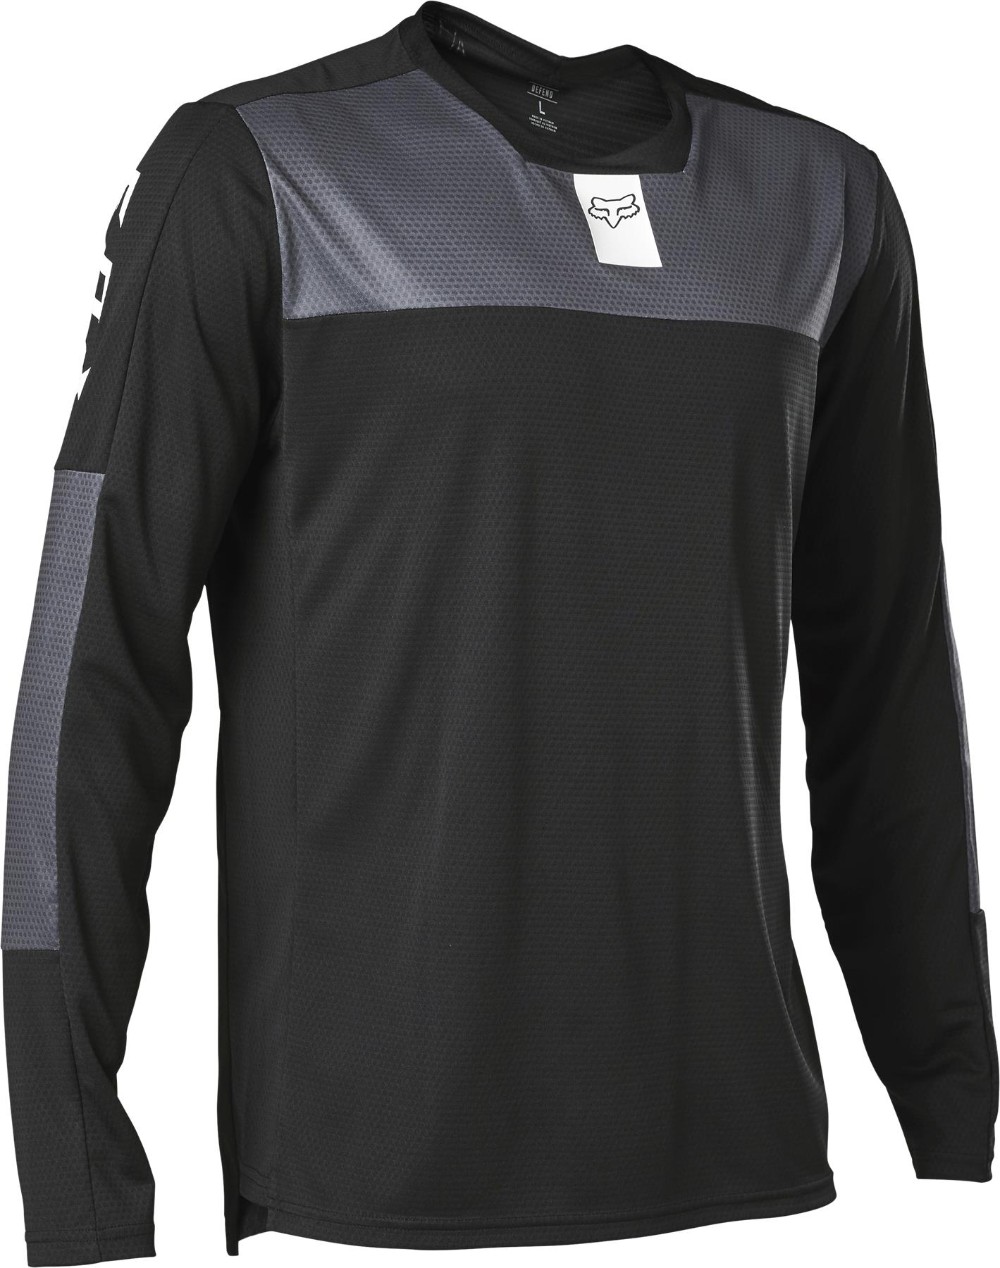 Defend Foxhead Long Sleeve MTB Cycling Jersey image 0